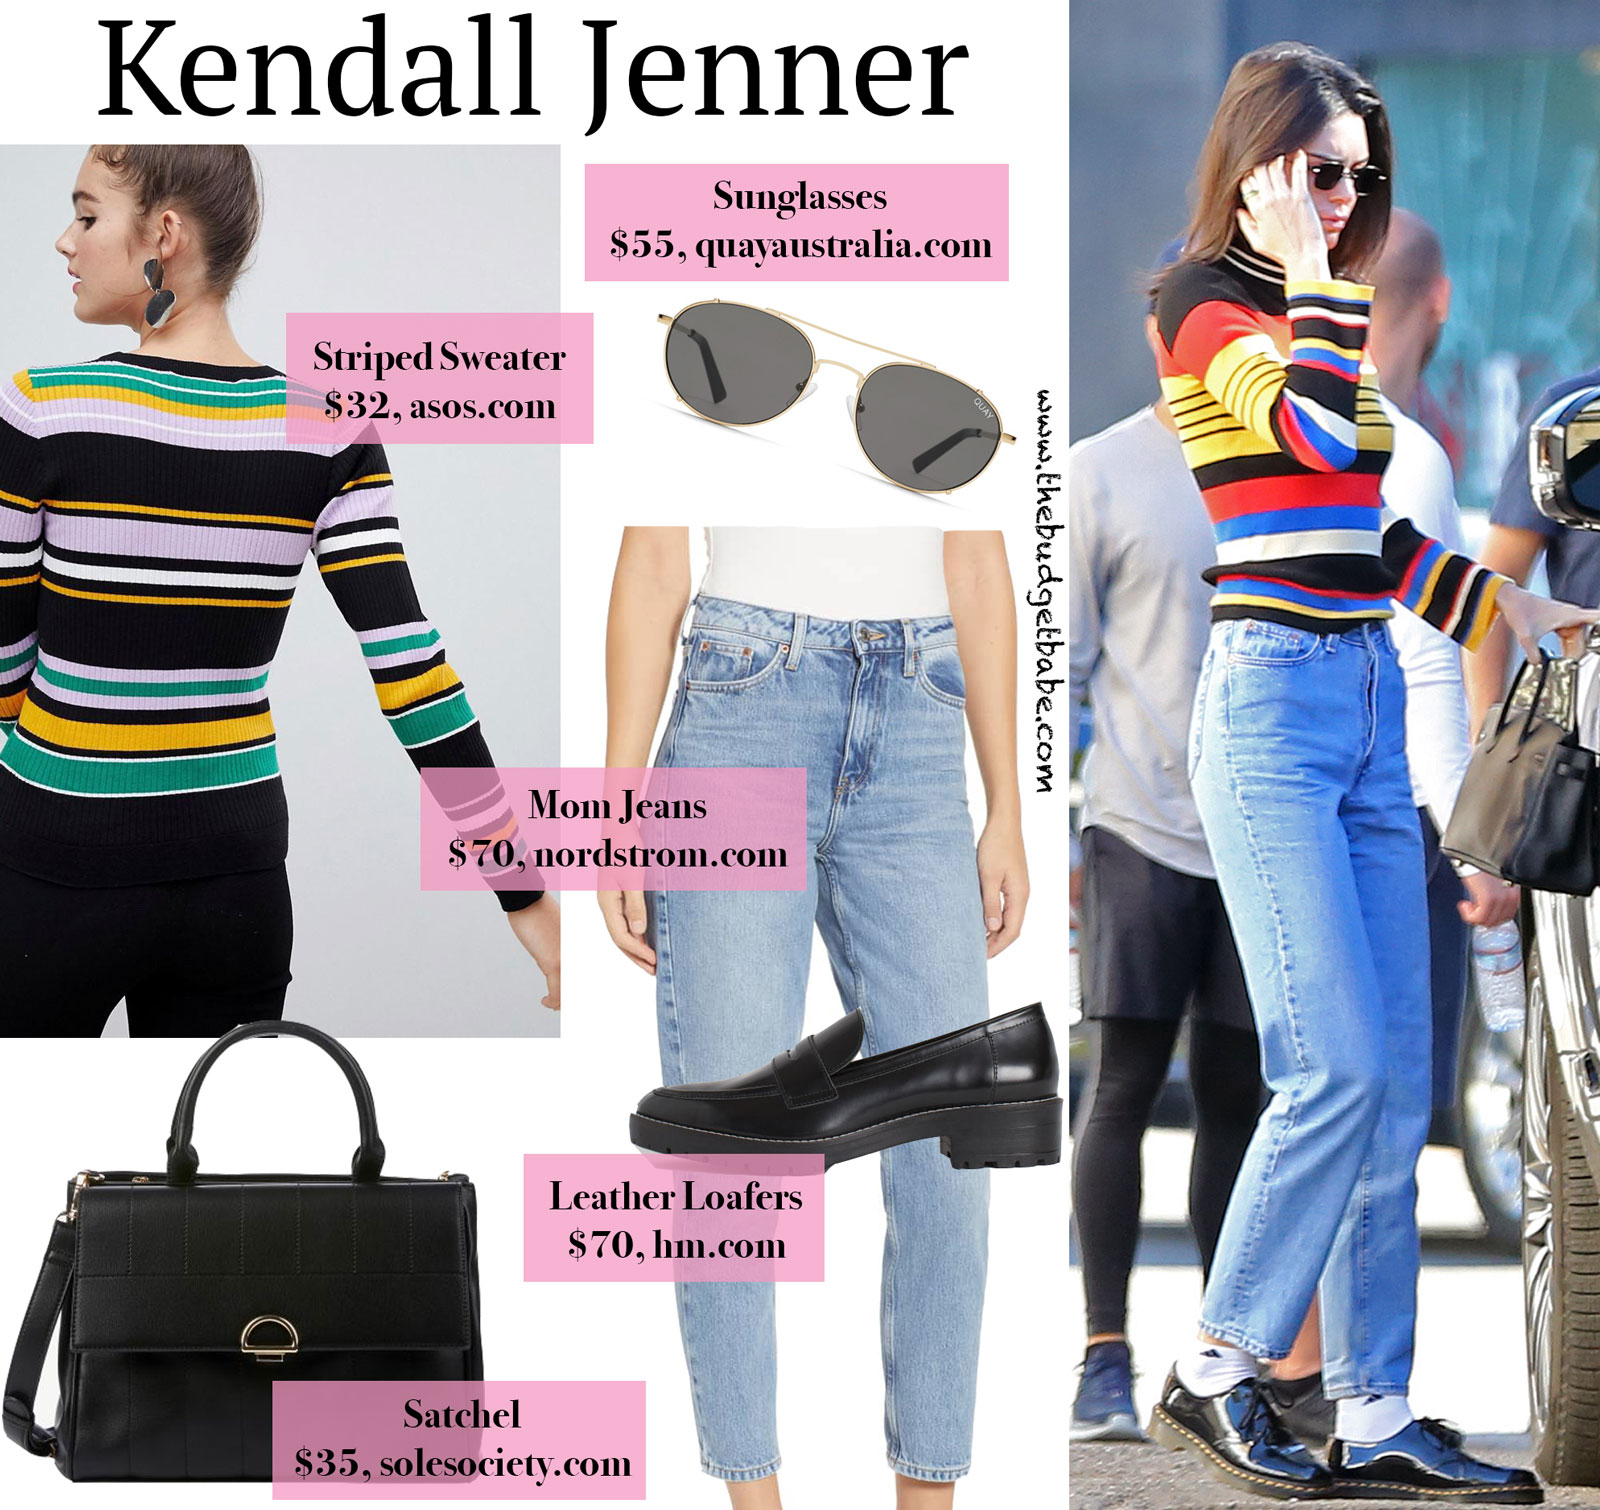 Kendall Jenner Striped Sweater and Loafers Look for Less